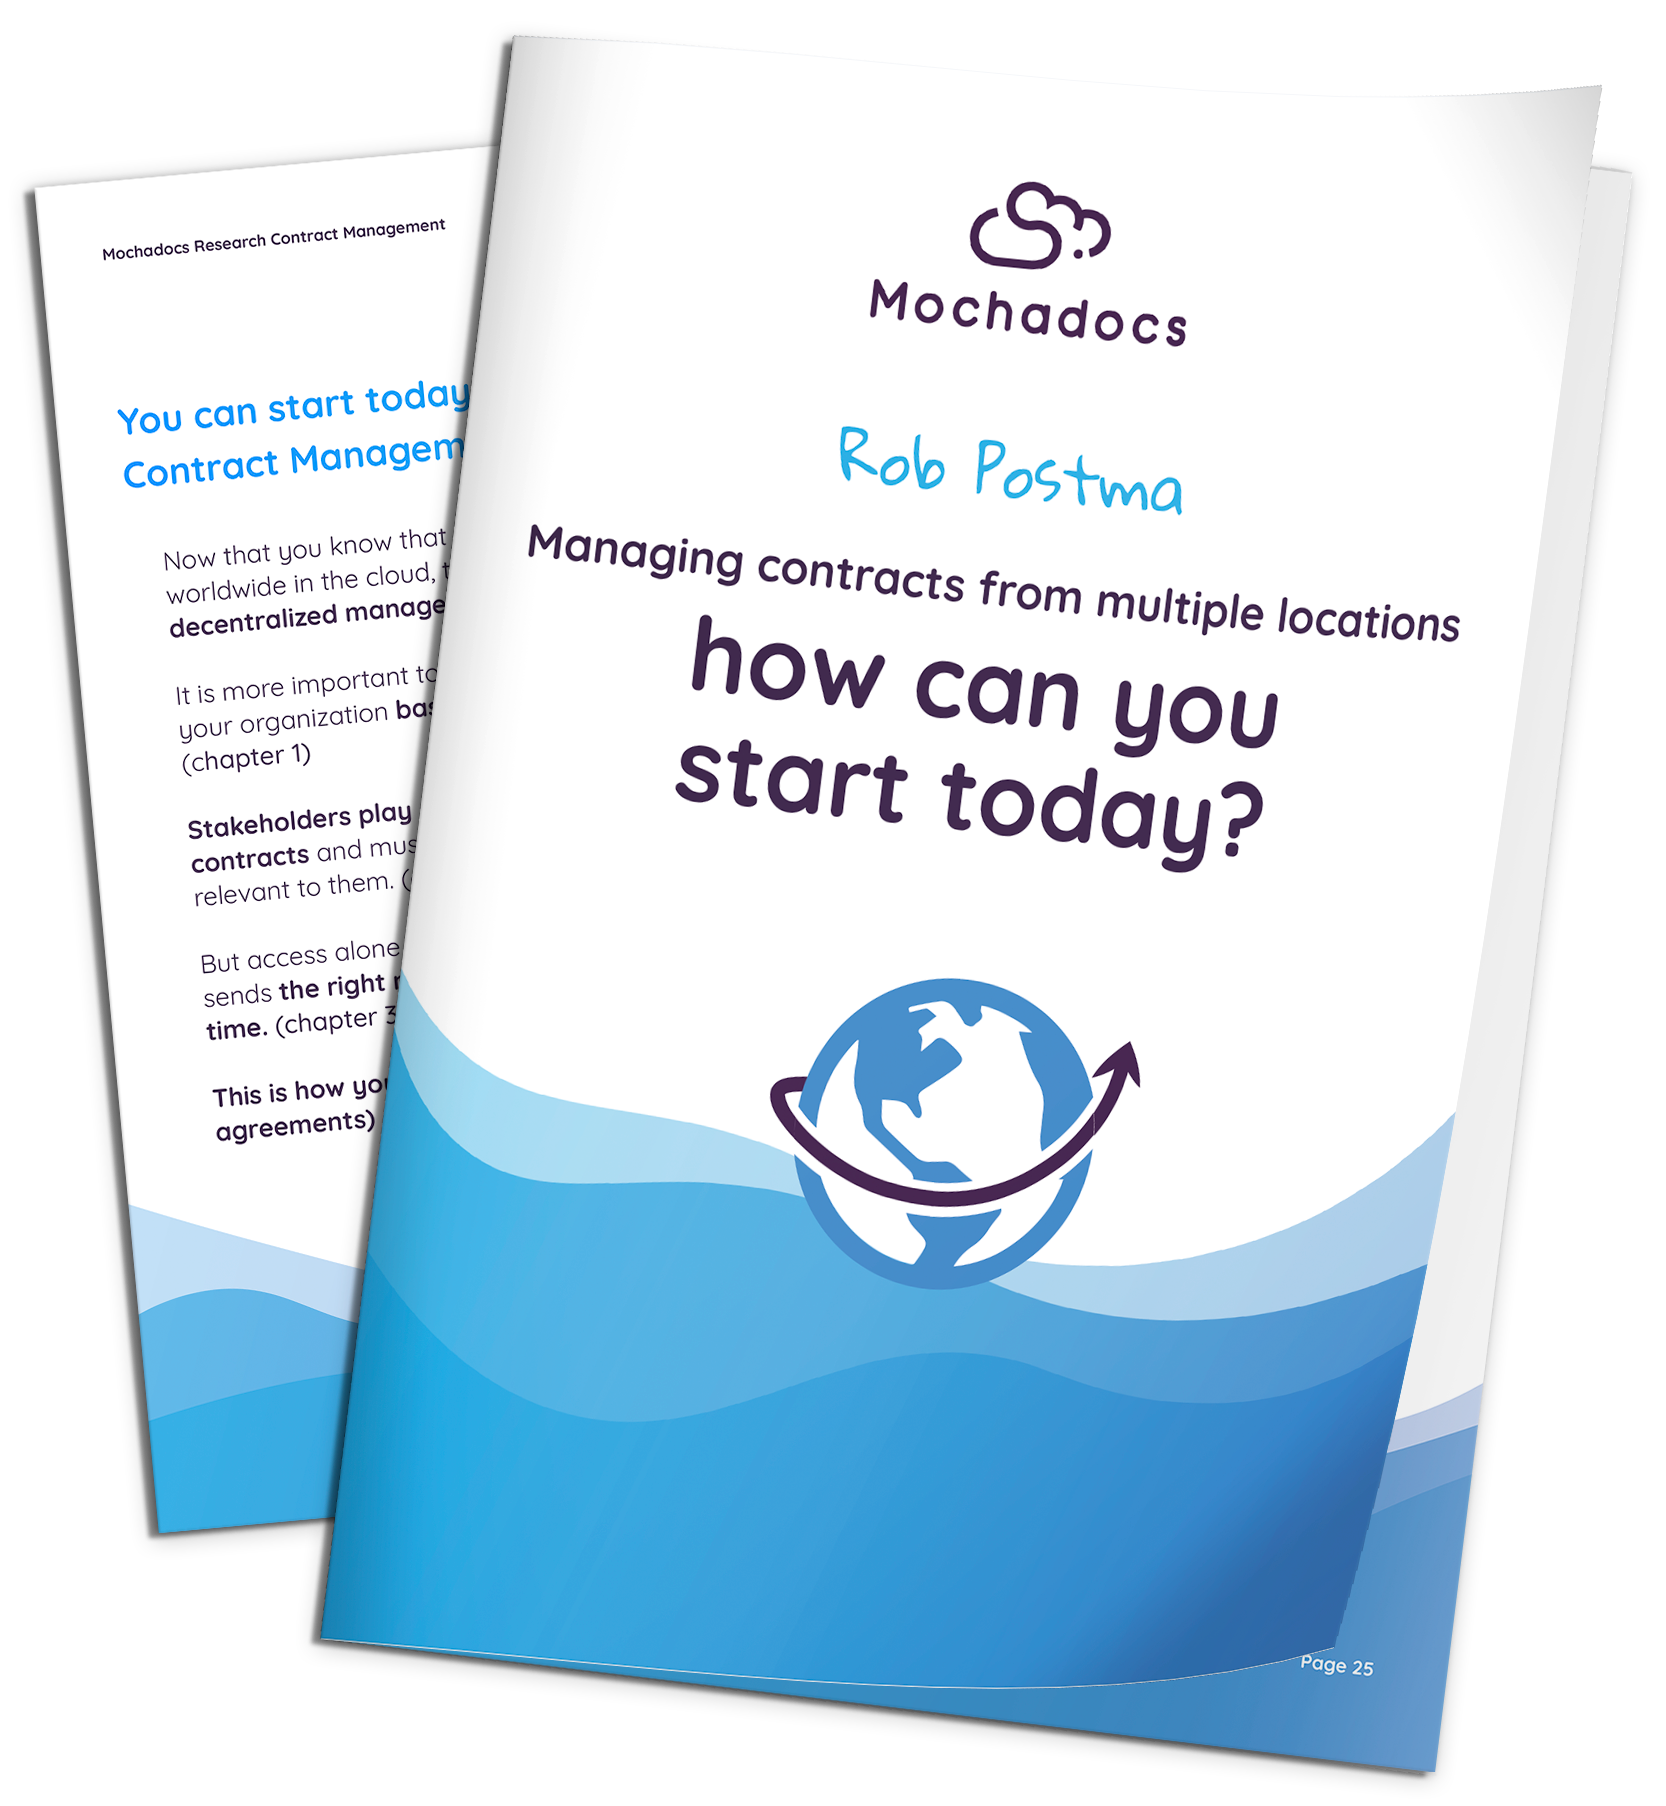 Mochadocs - Contract Management - eBook - Managing contracts from multiple locations, how can you start today?